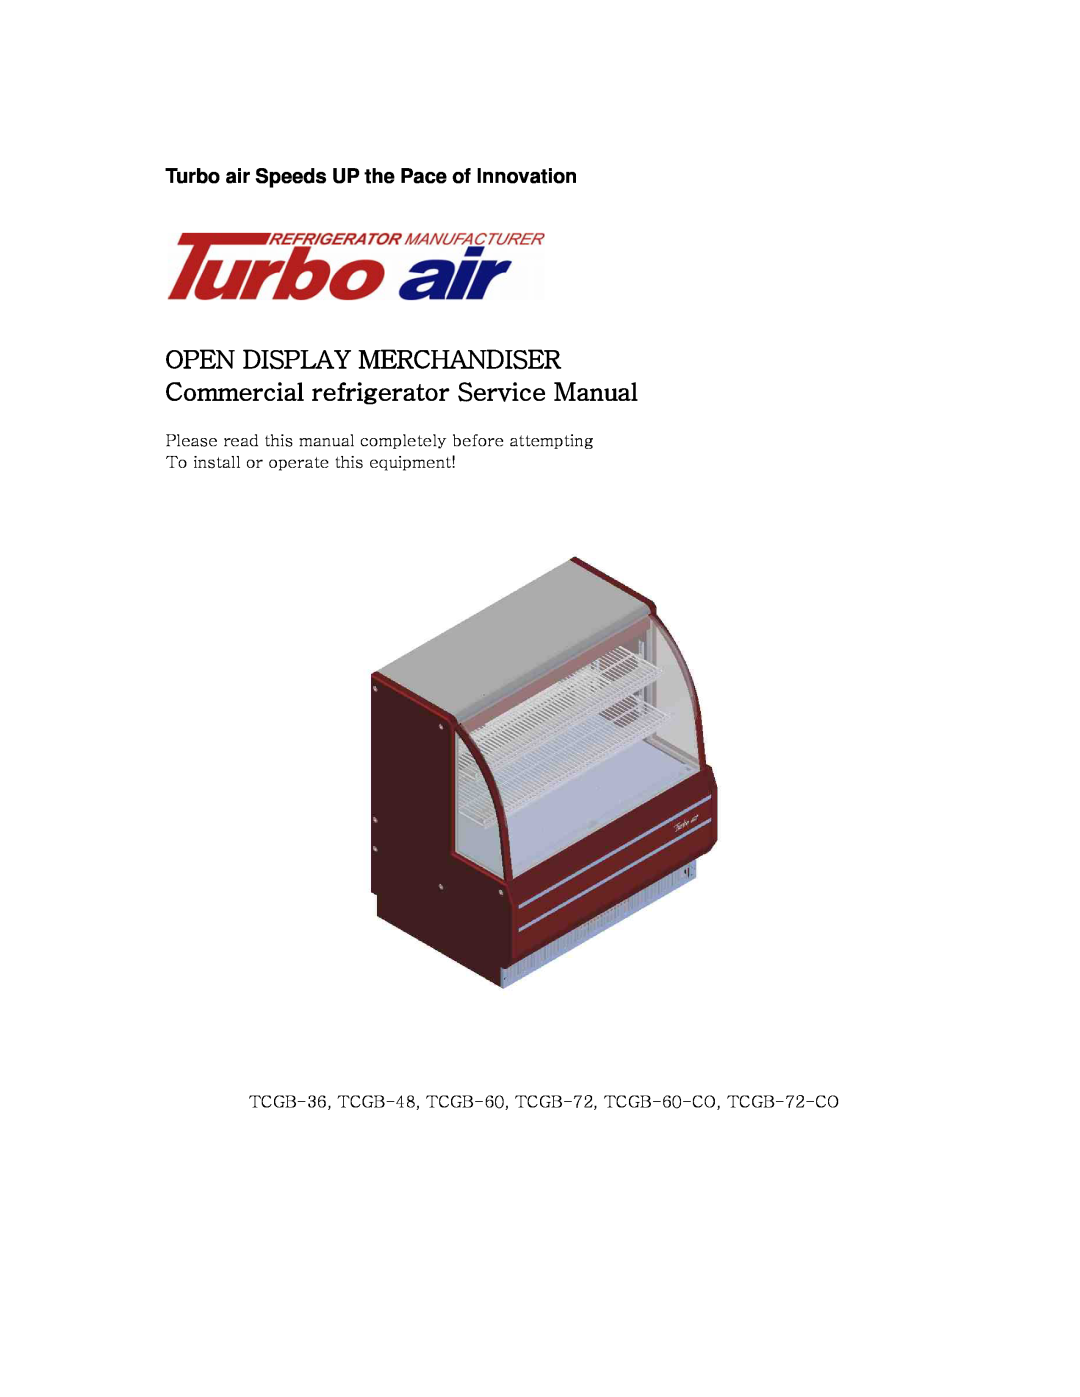 Turbo Air TCGB-36, TCGB-72-CO service manual Open Display Merchandiser, Turbo air Speeds UP the Pace of Innovation 